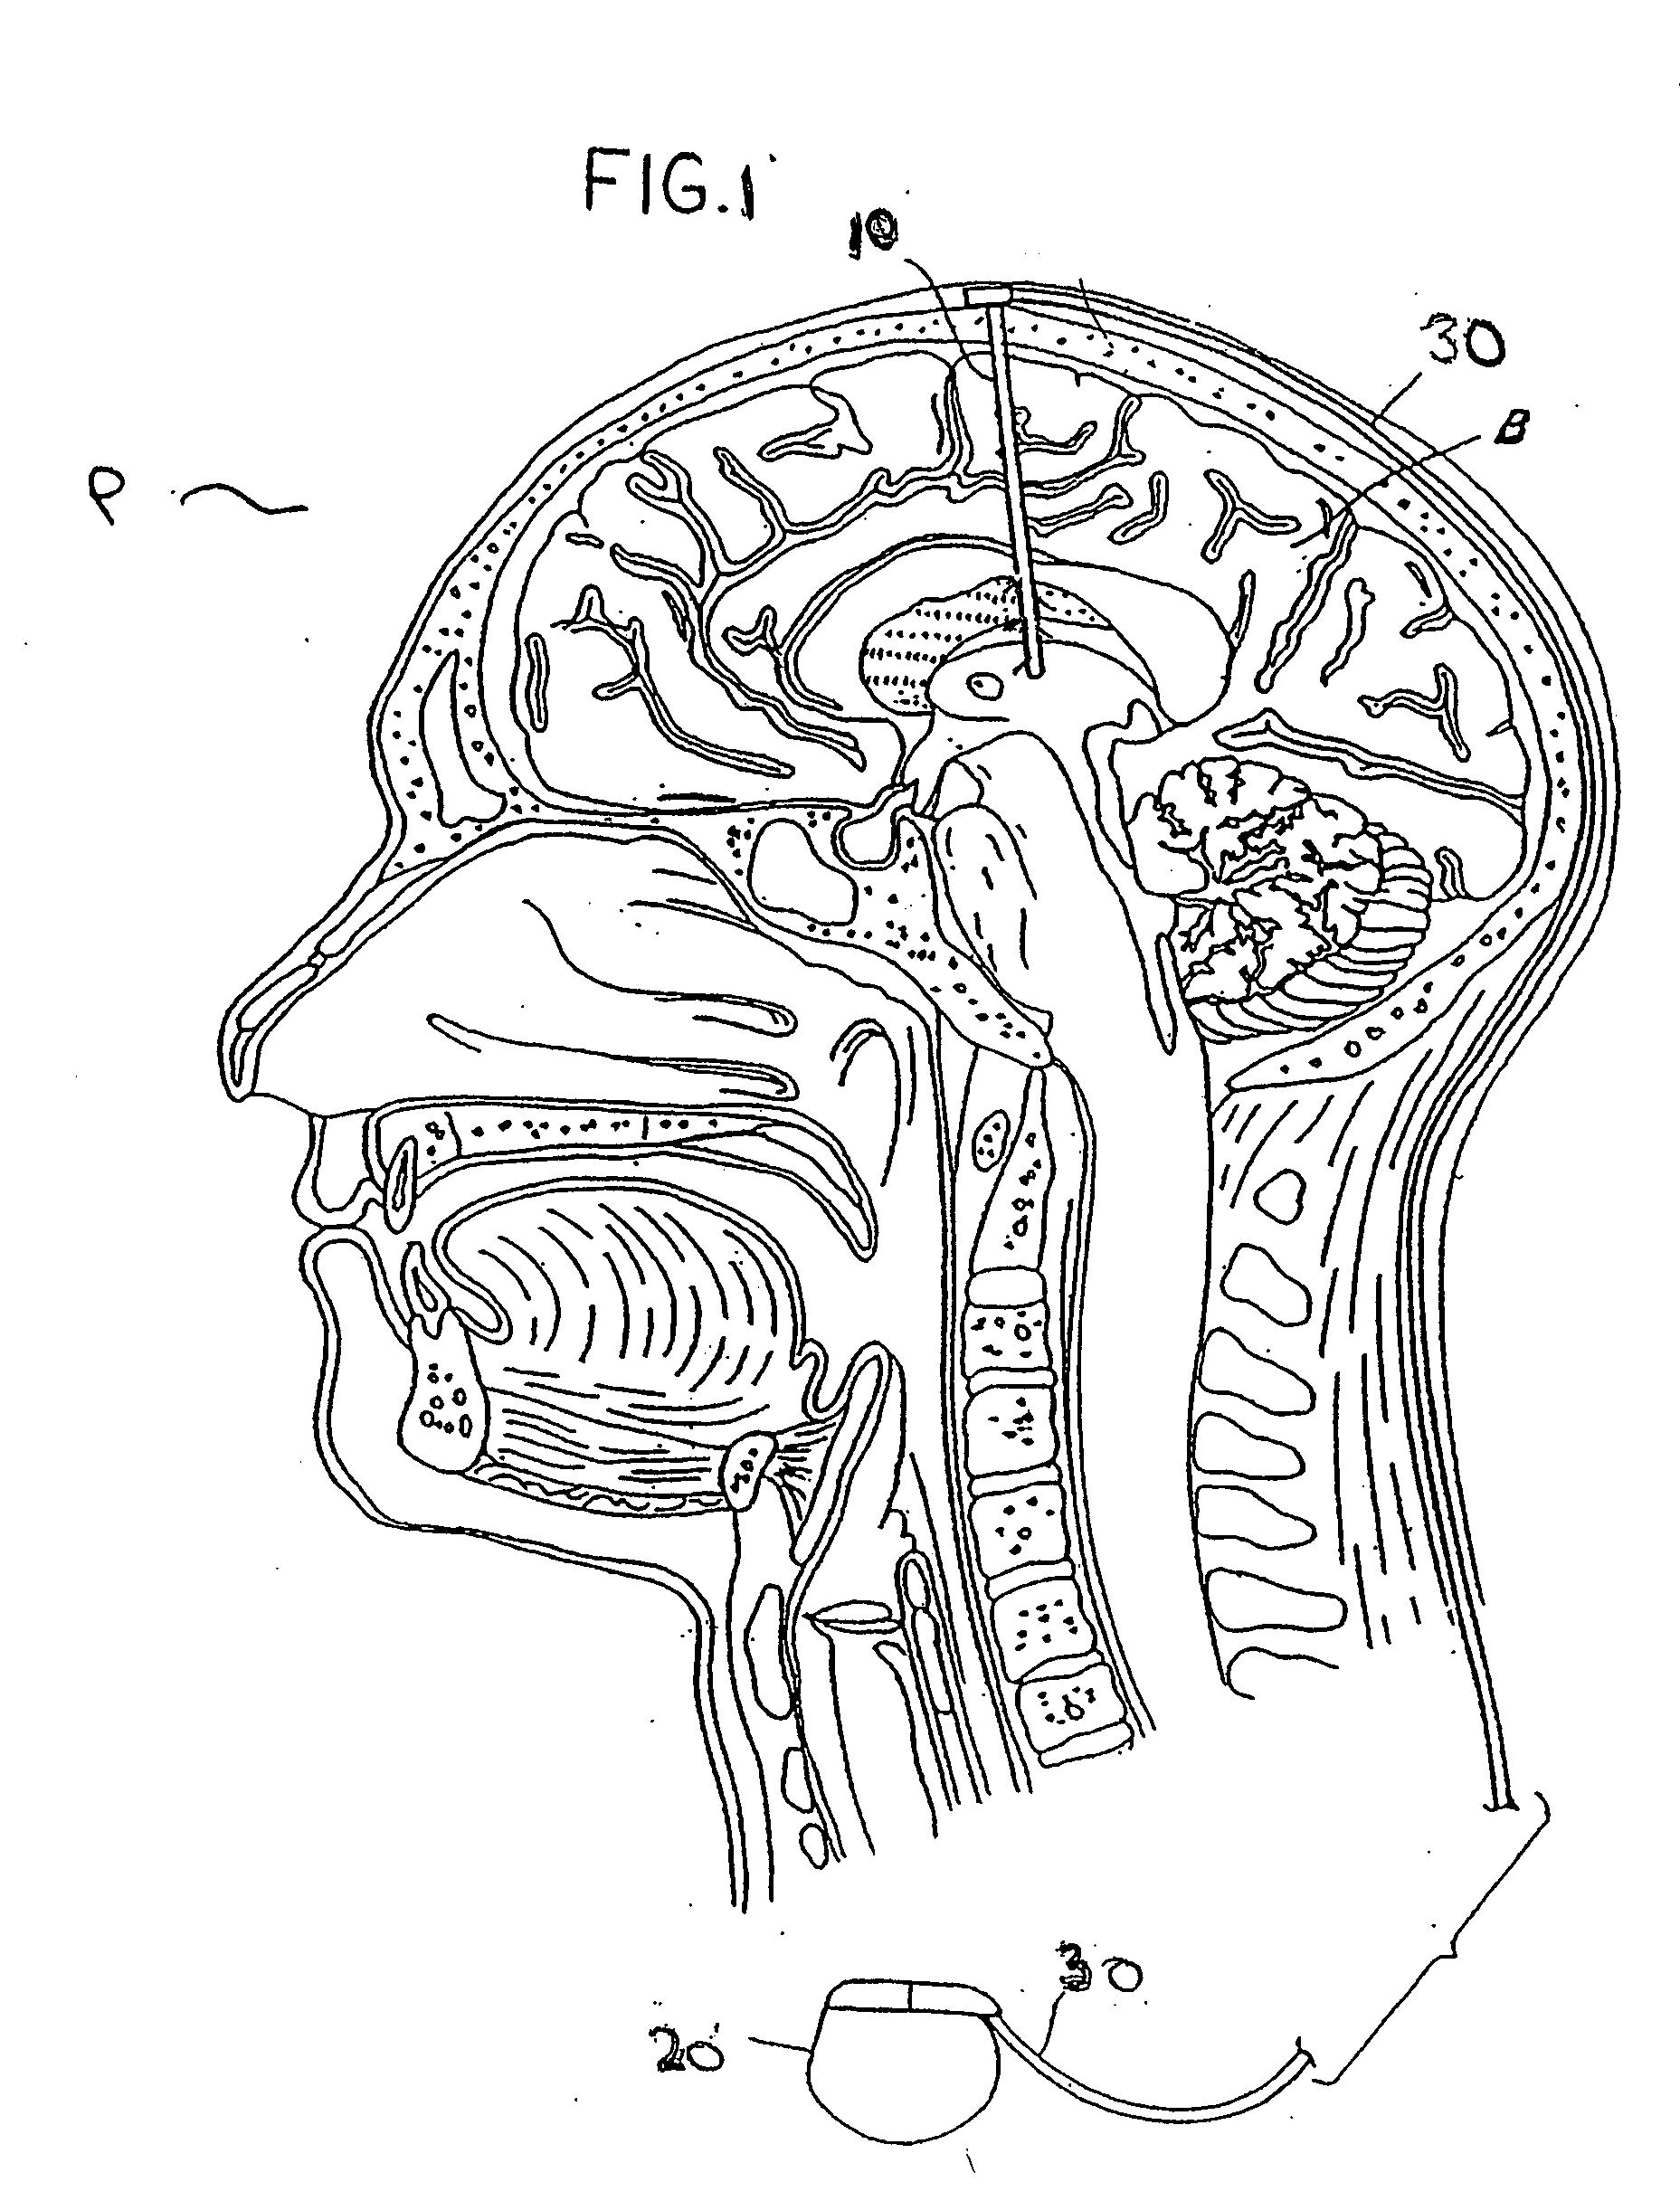 Methods of affecting hypothalamic-related conditions